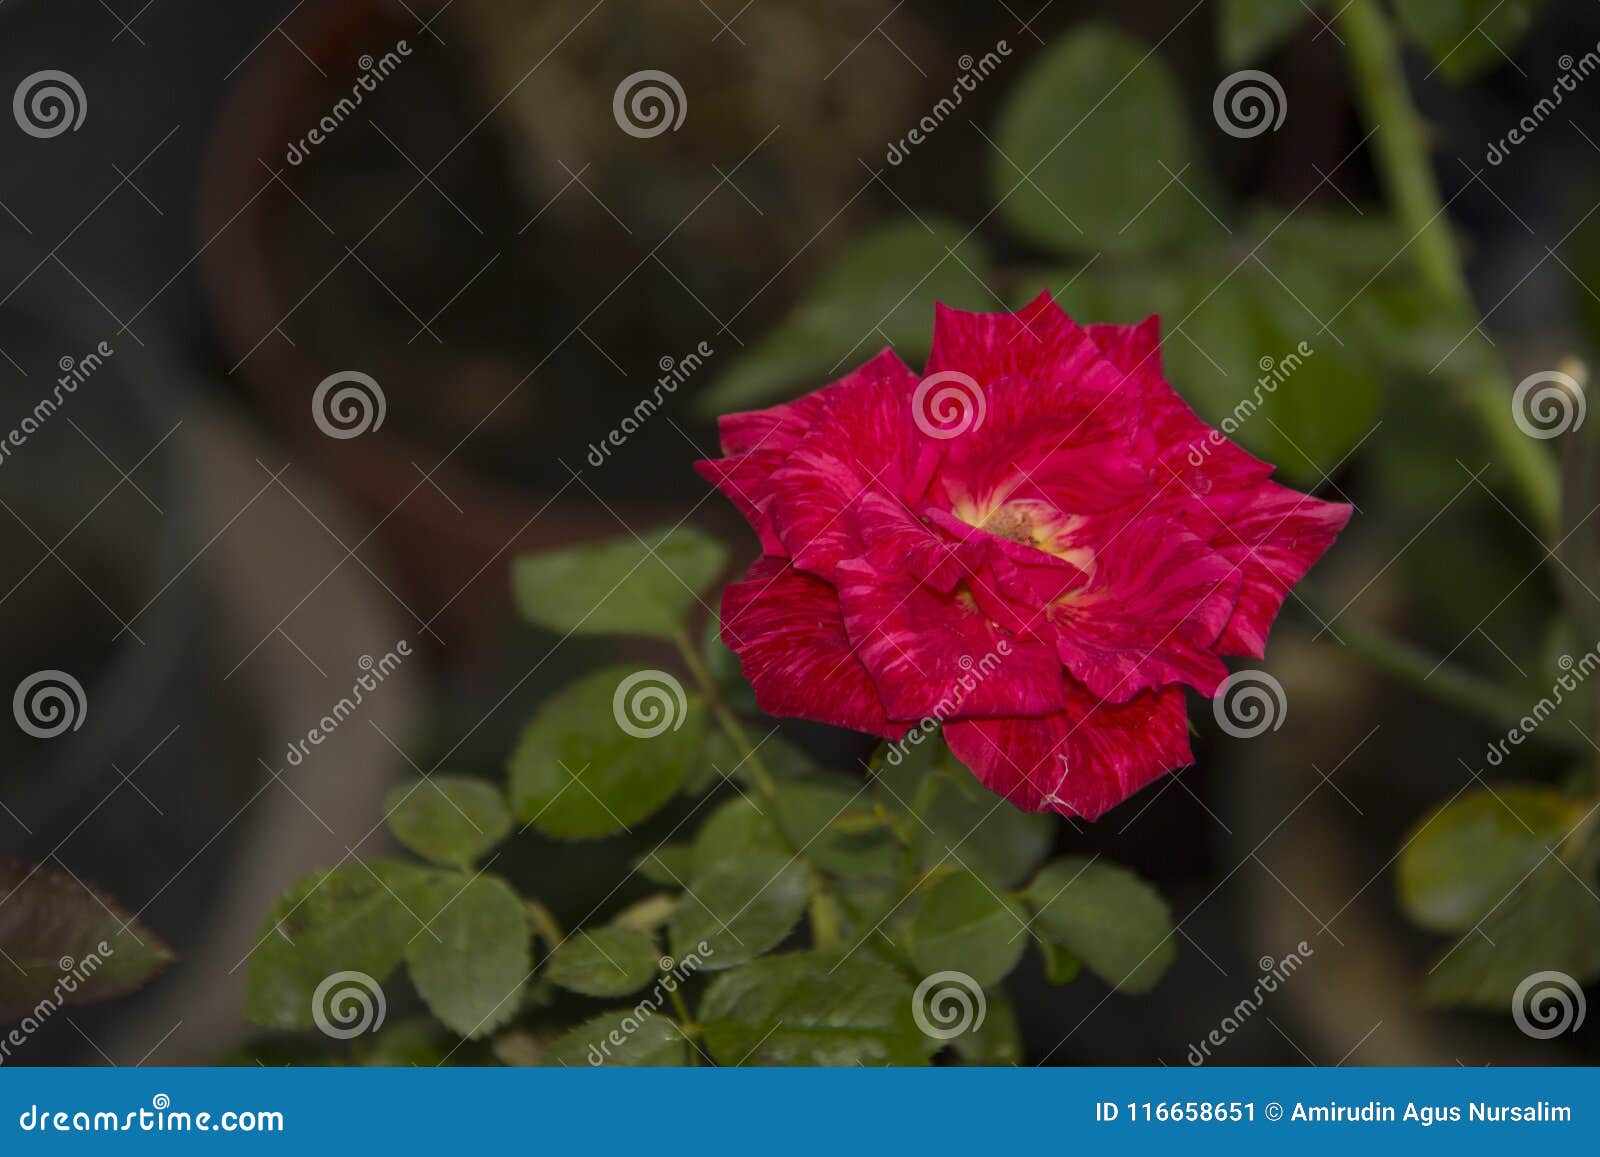 A Rose Red Flower Roses The Beauty Of The Rose Stock Image